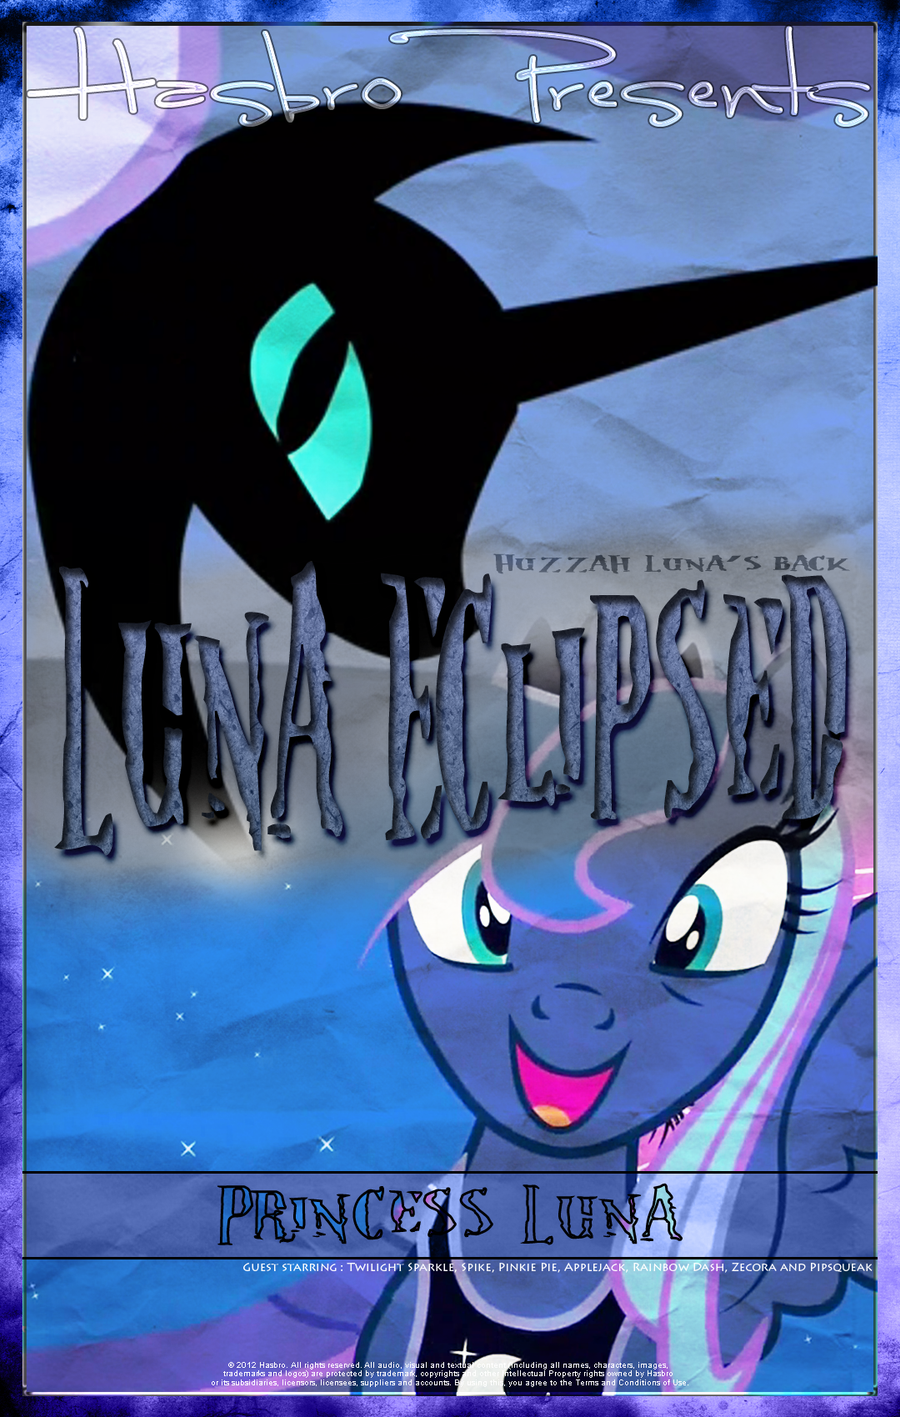 mlp___luna_eclipsed___movie_poster_by_pims1978-d52qxfg.png